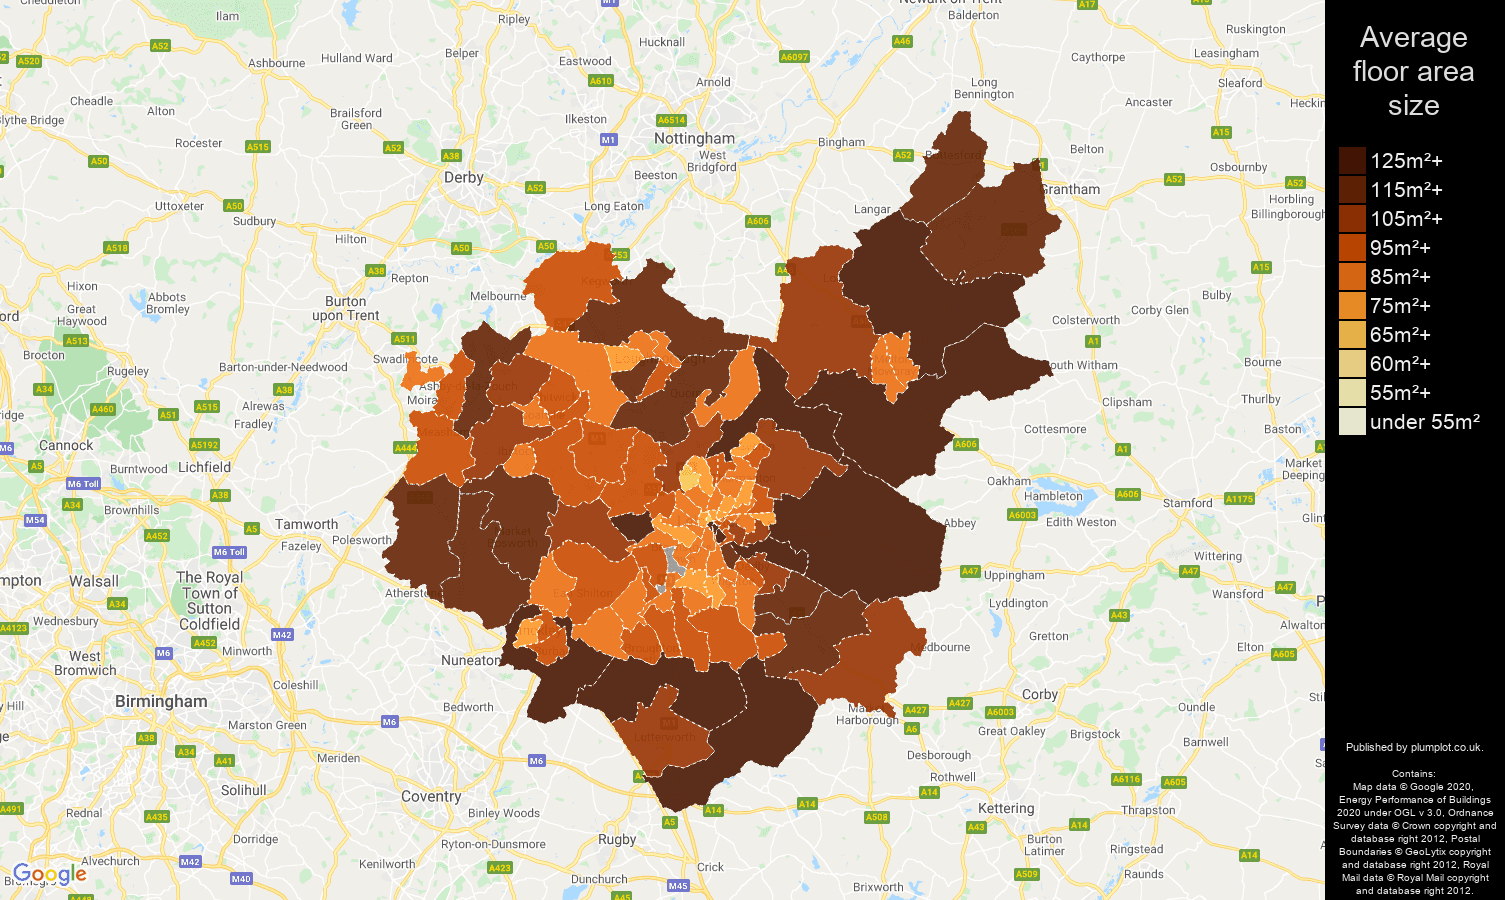 Leicestershire map of average floor area size of houses